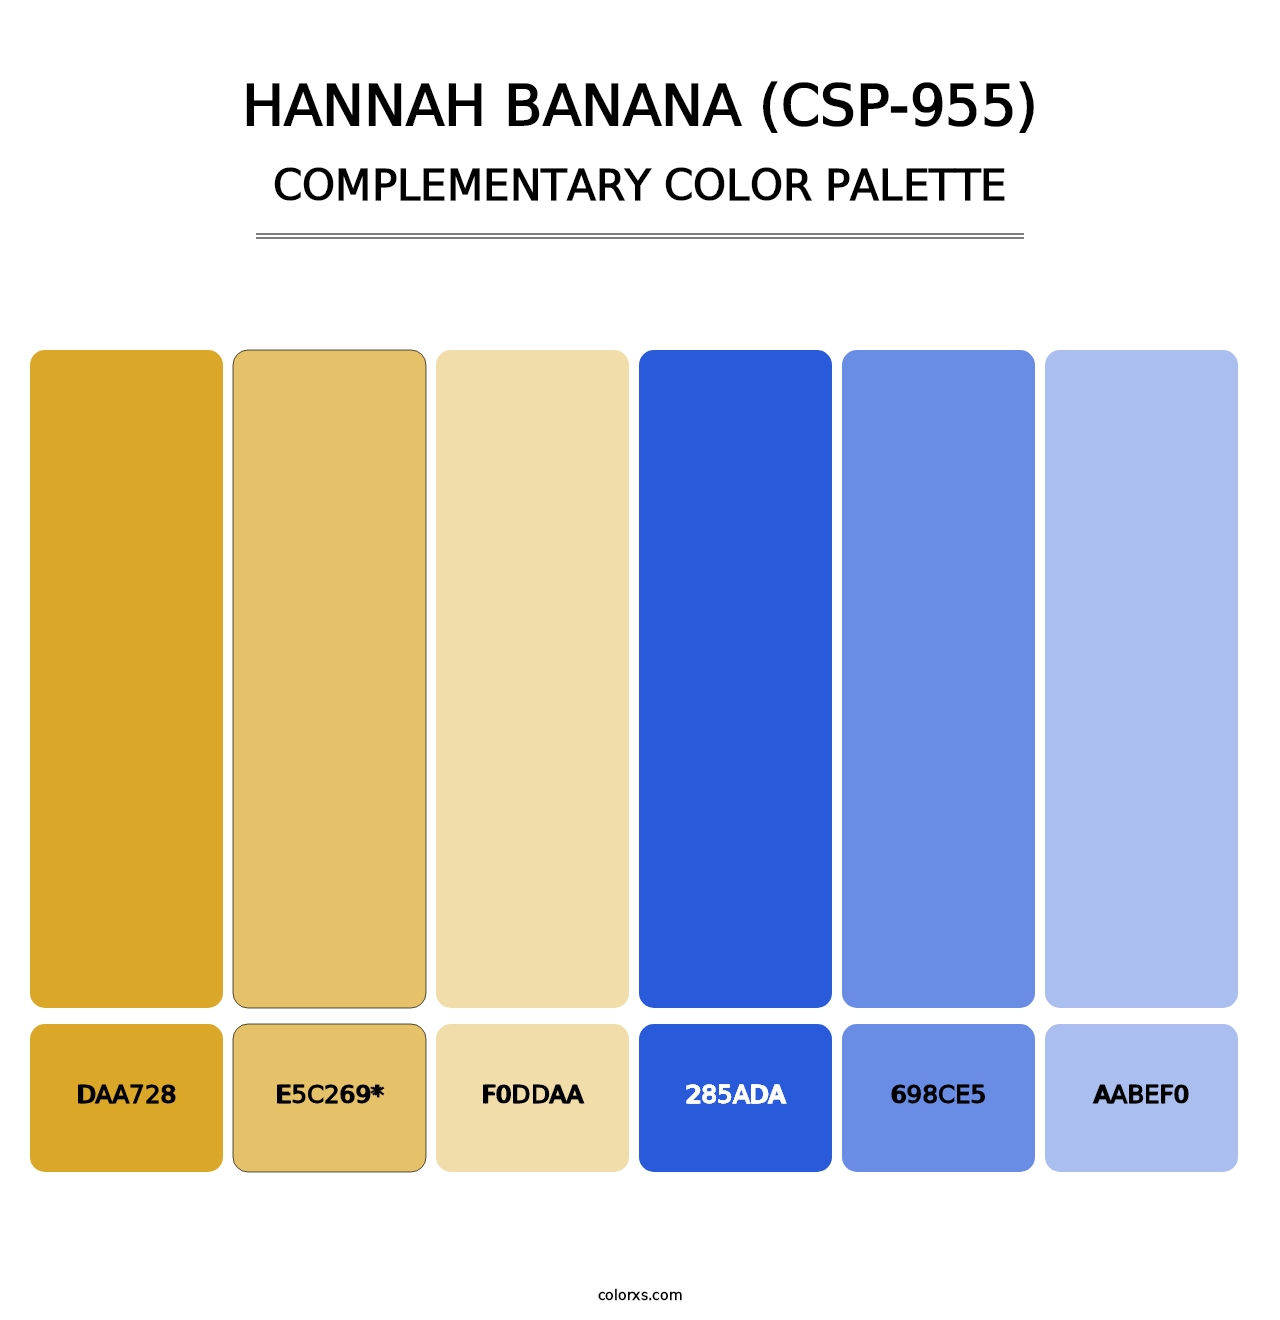 Hannah Banana (CSP-955) - Complementary Color Palette